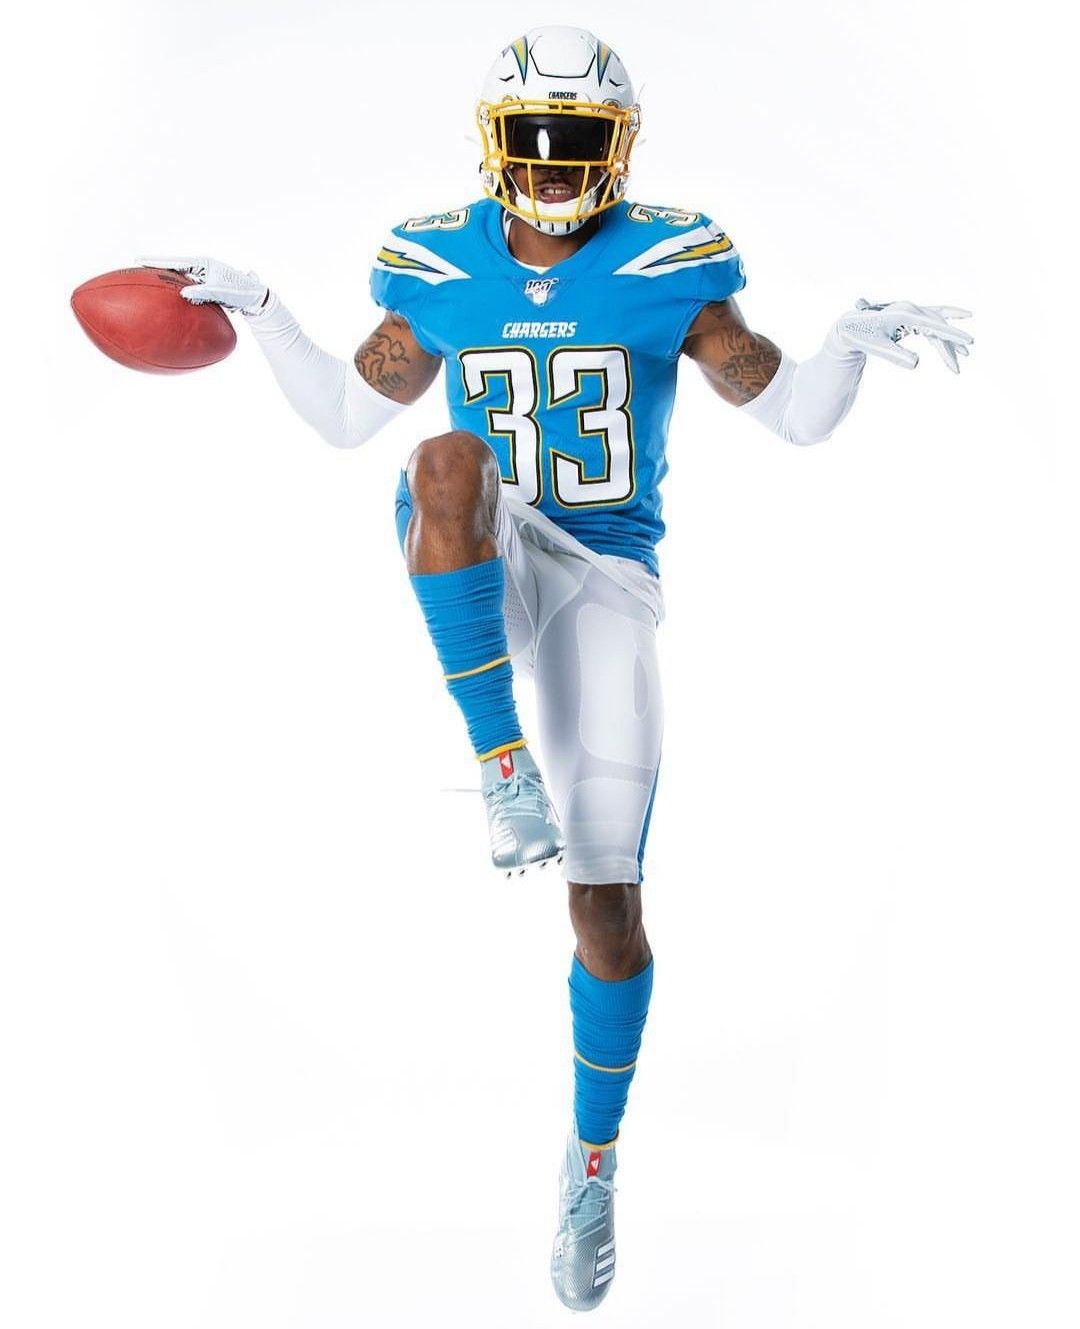 LA CHARGERS ideas. chargers, los angeles chargers, chargers football